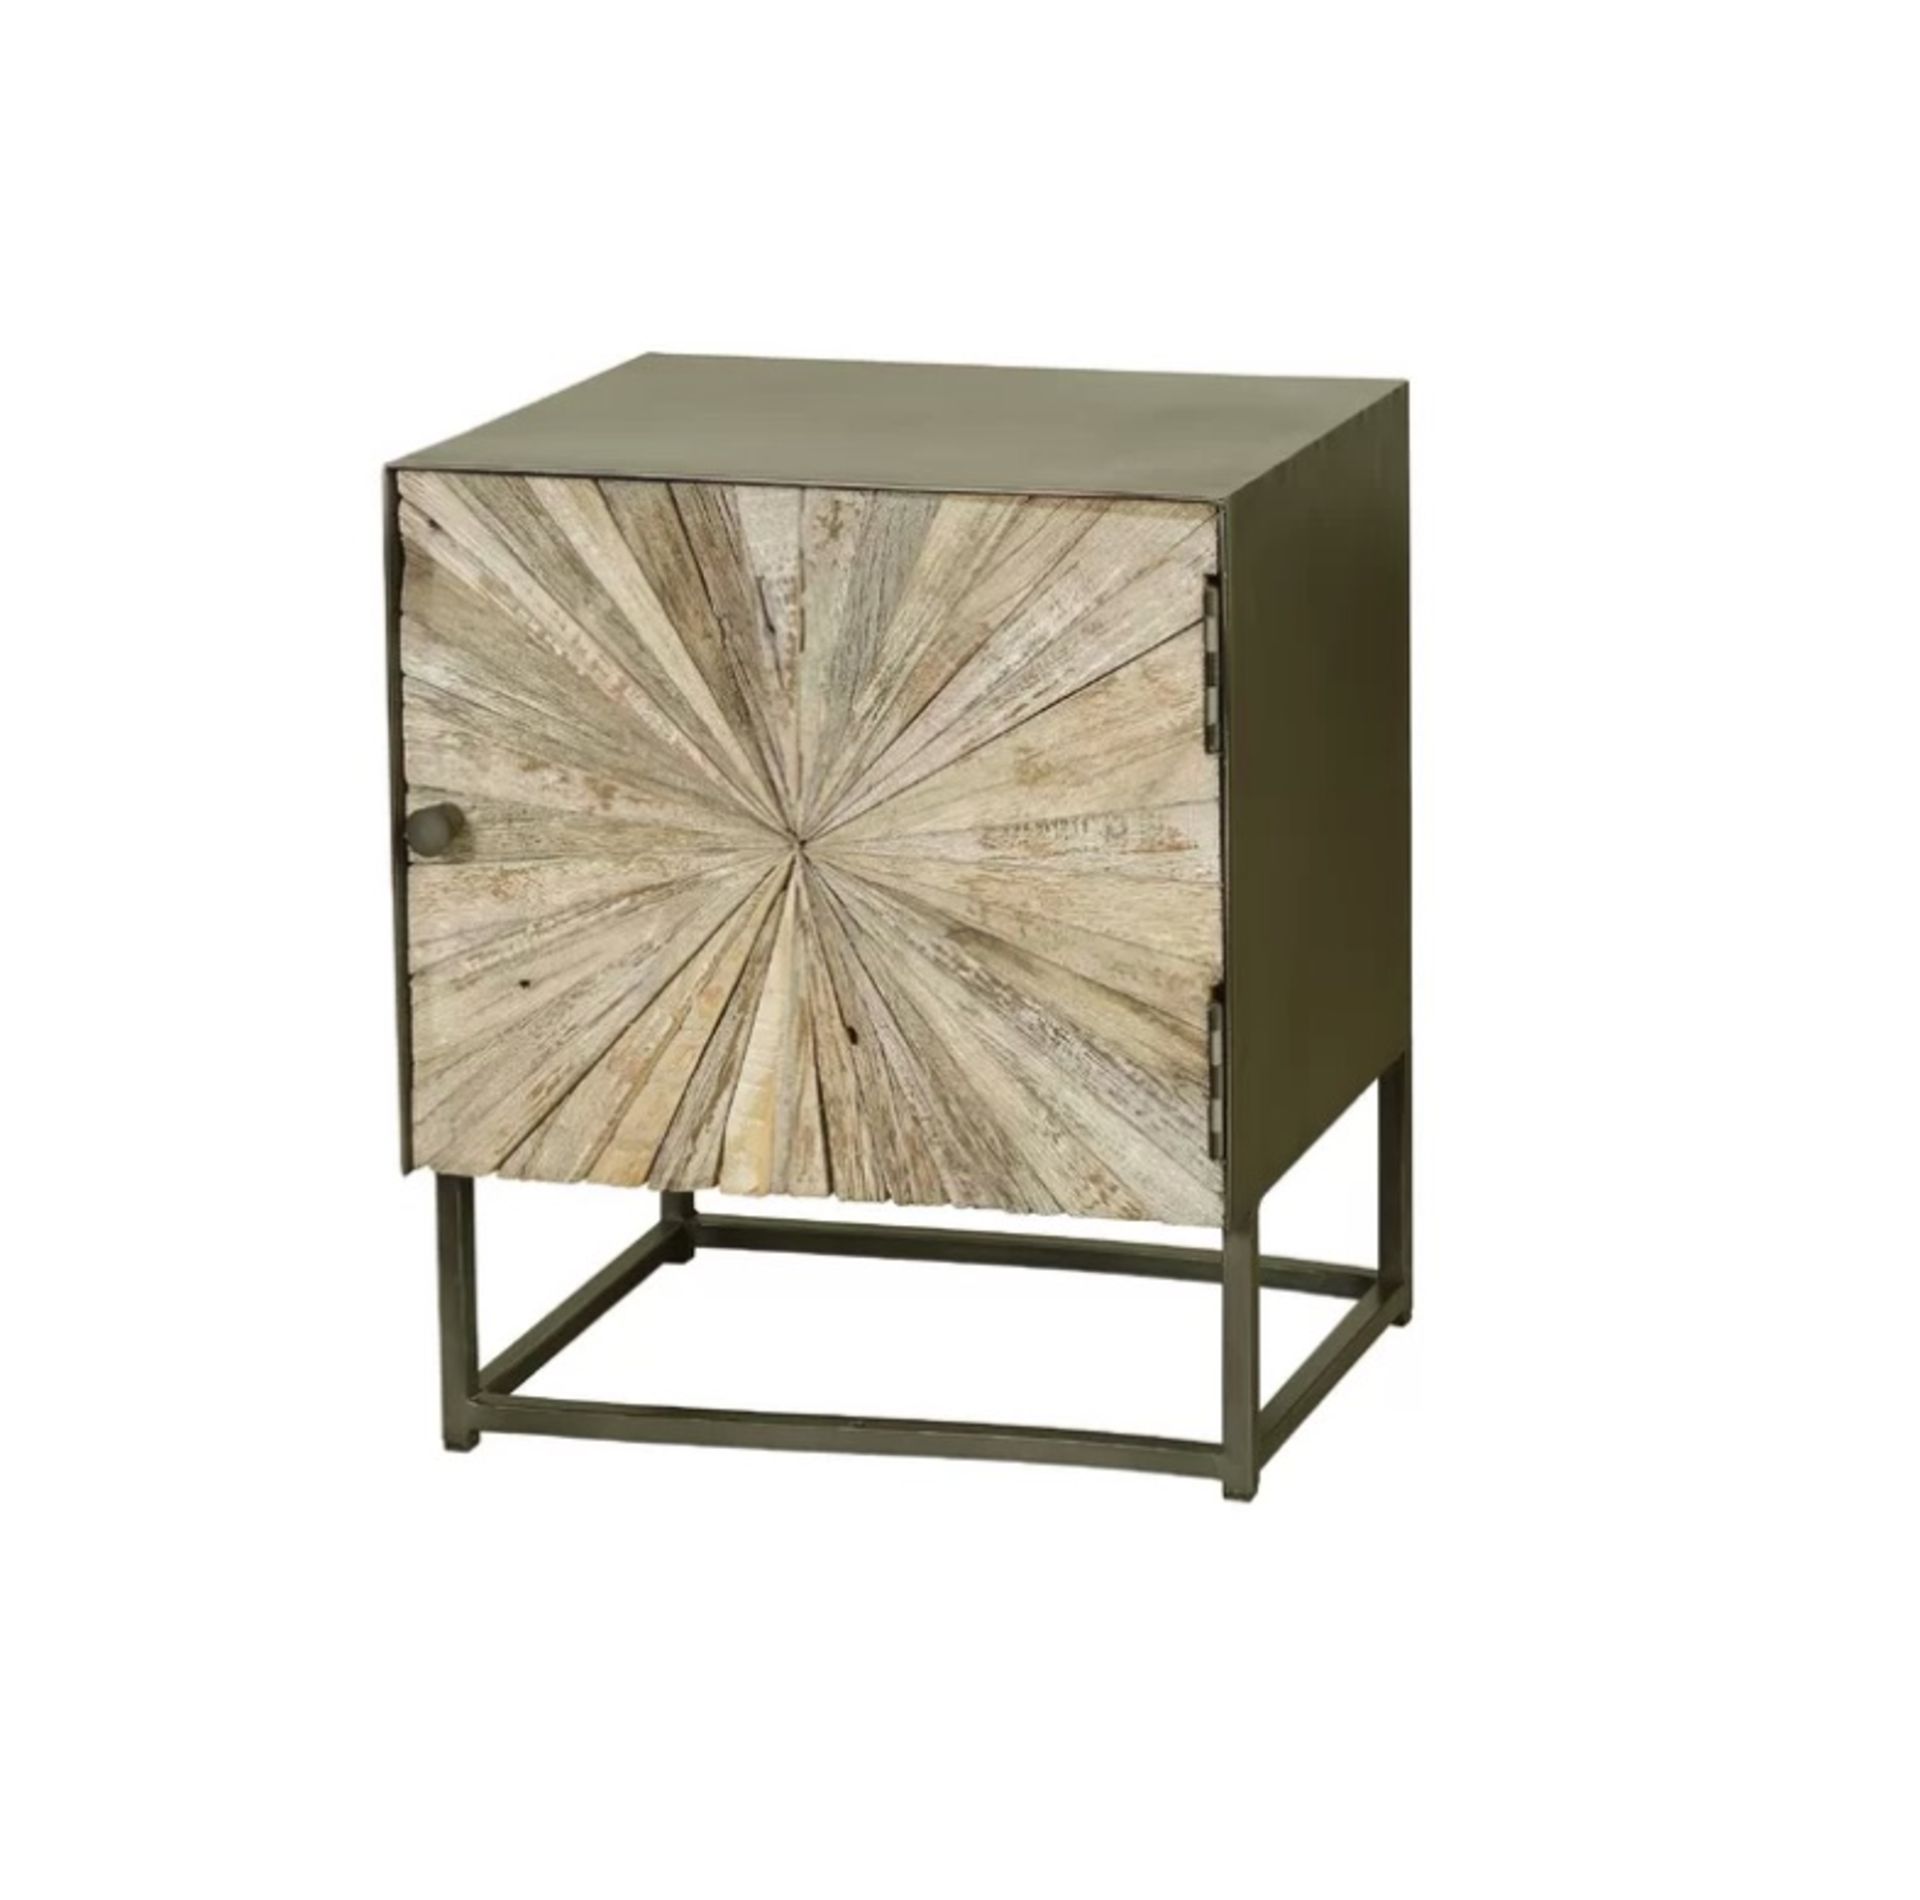 Tonal Bedside Table Bedside Cabinet Single Door Beautiful Tonal Woods In White Washed And Grey Metal